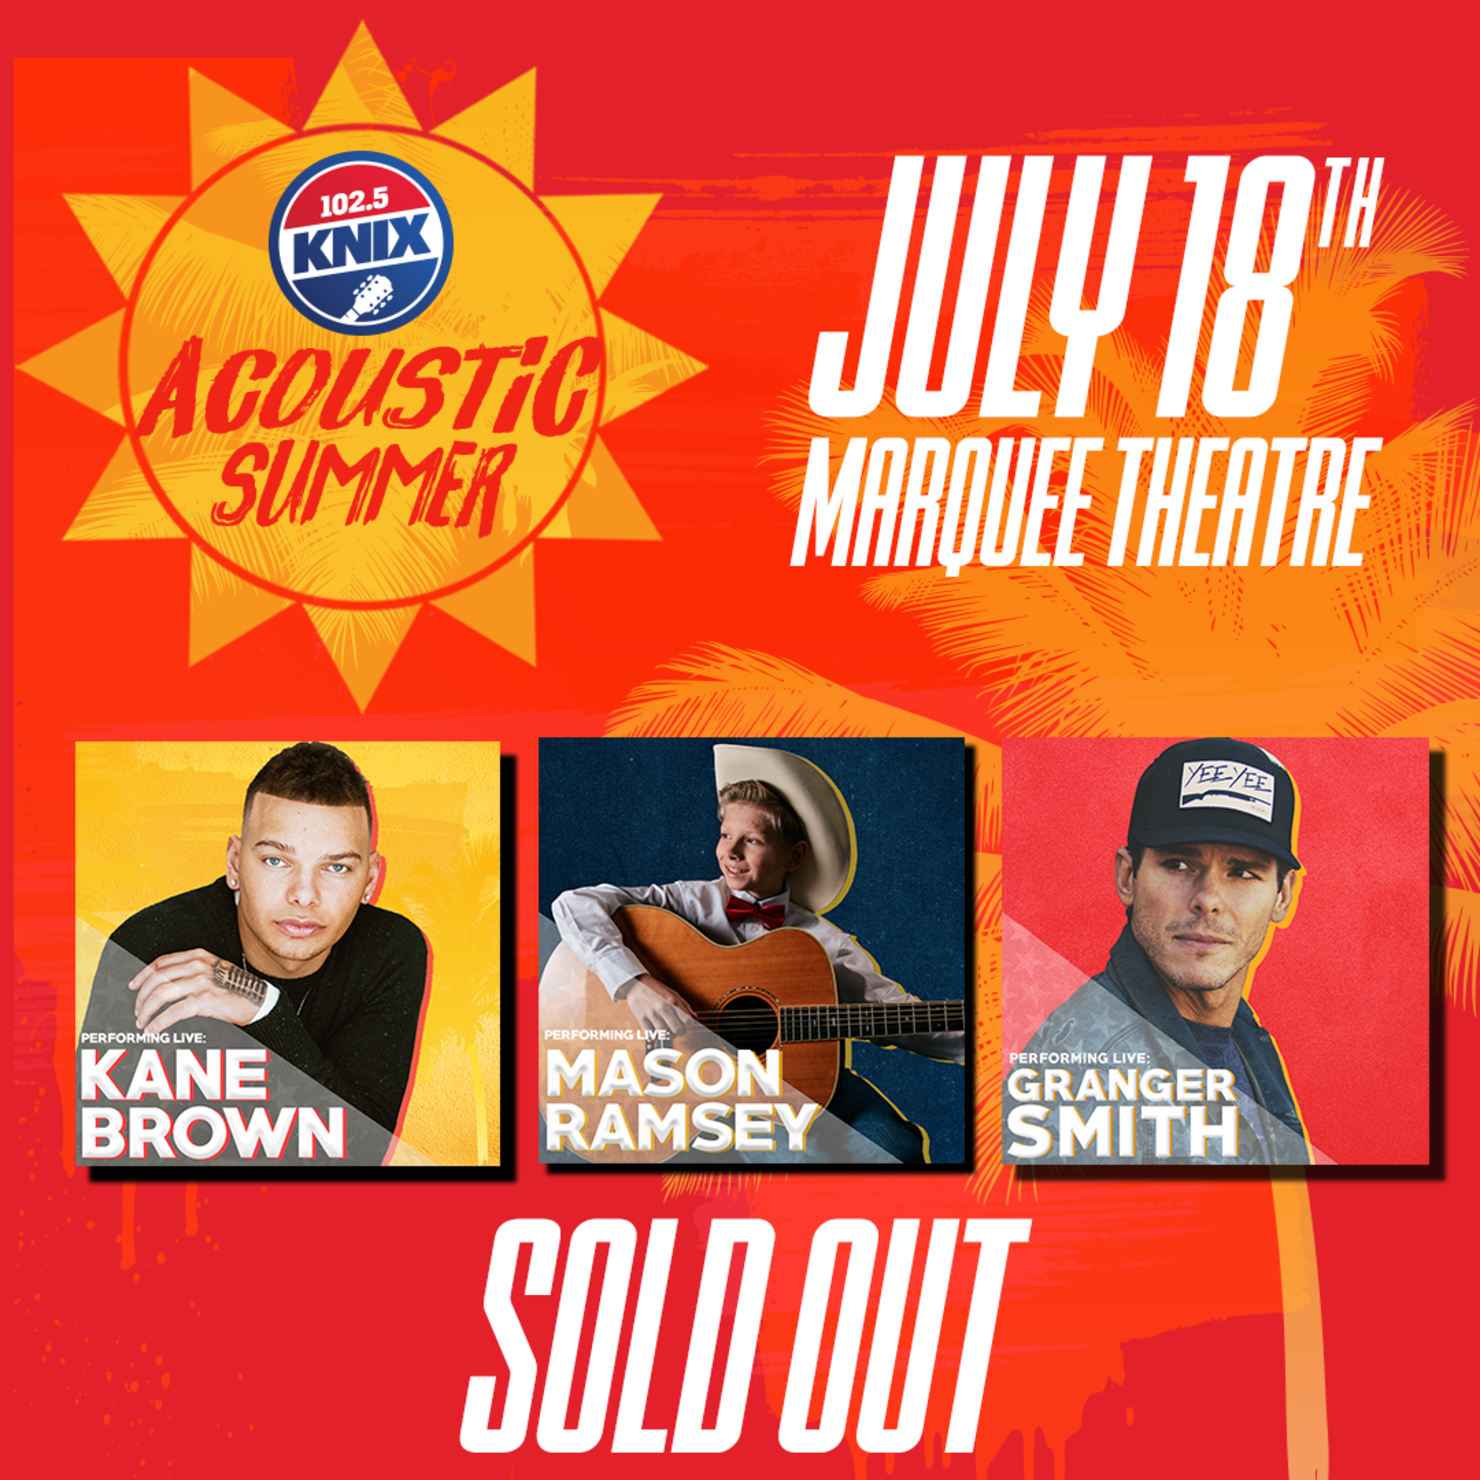 102.5 KNIX Announces 'Acoustic Summer' 2018 Lineup iHeart